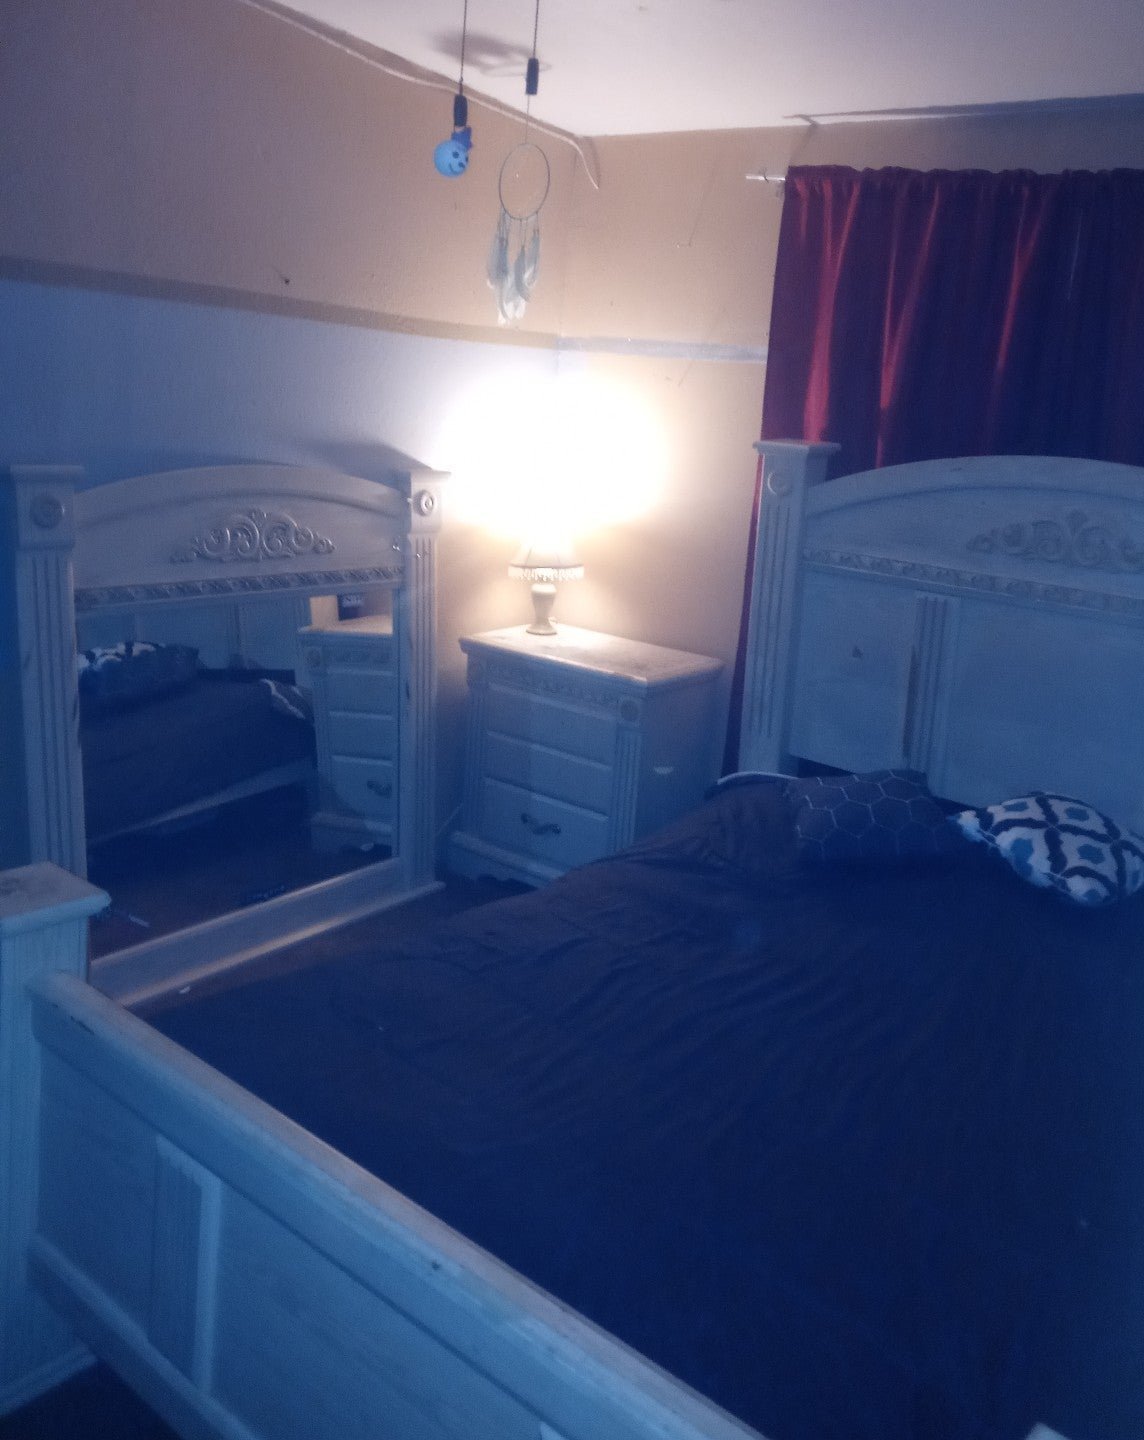 Queen bedroom ste with matching morrows and dresser drawers Ma7nKgeAf